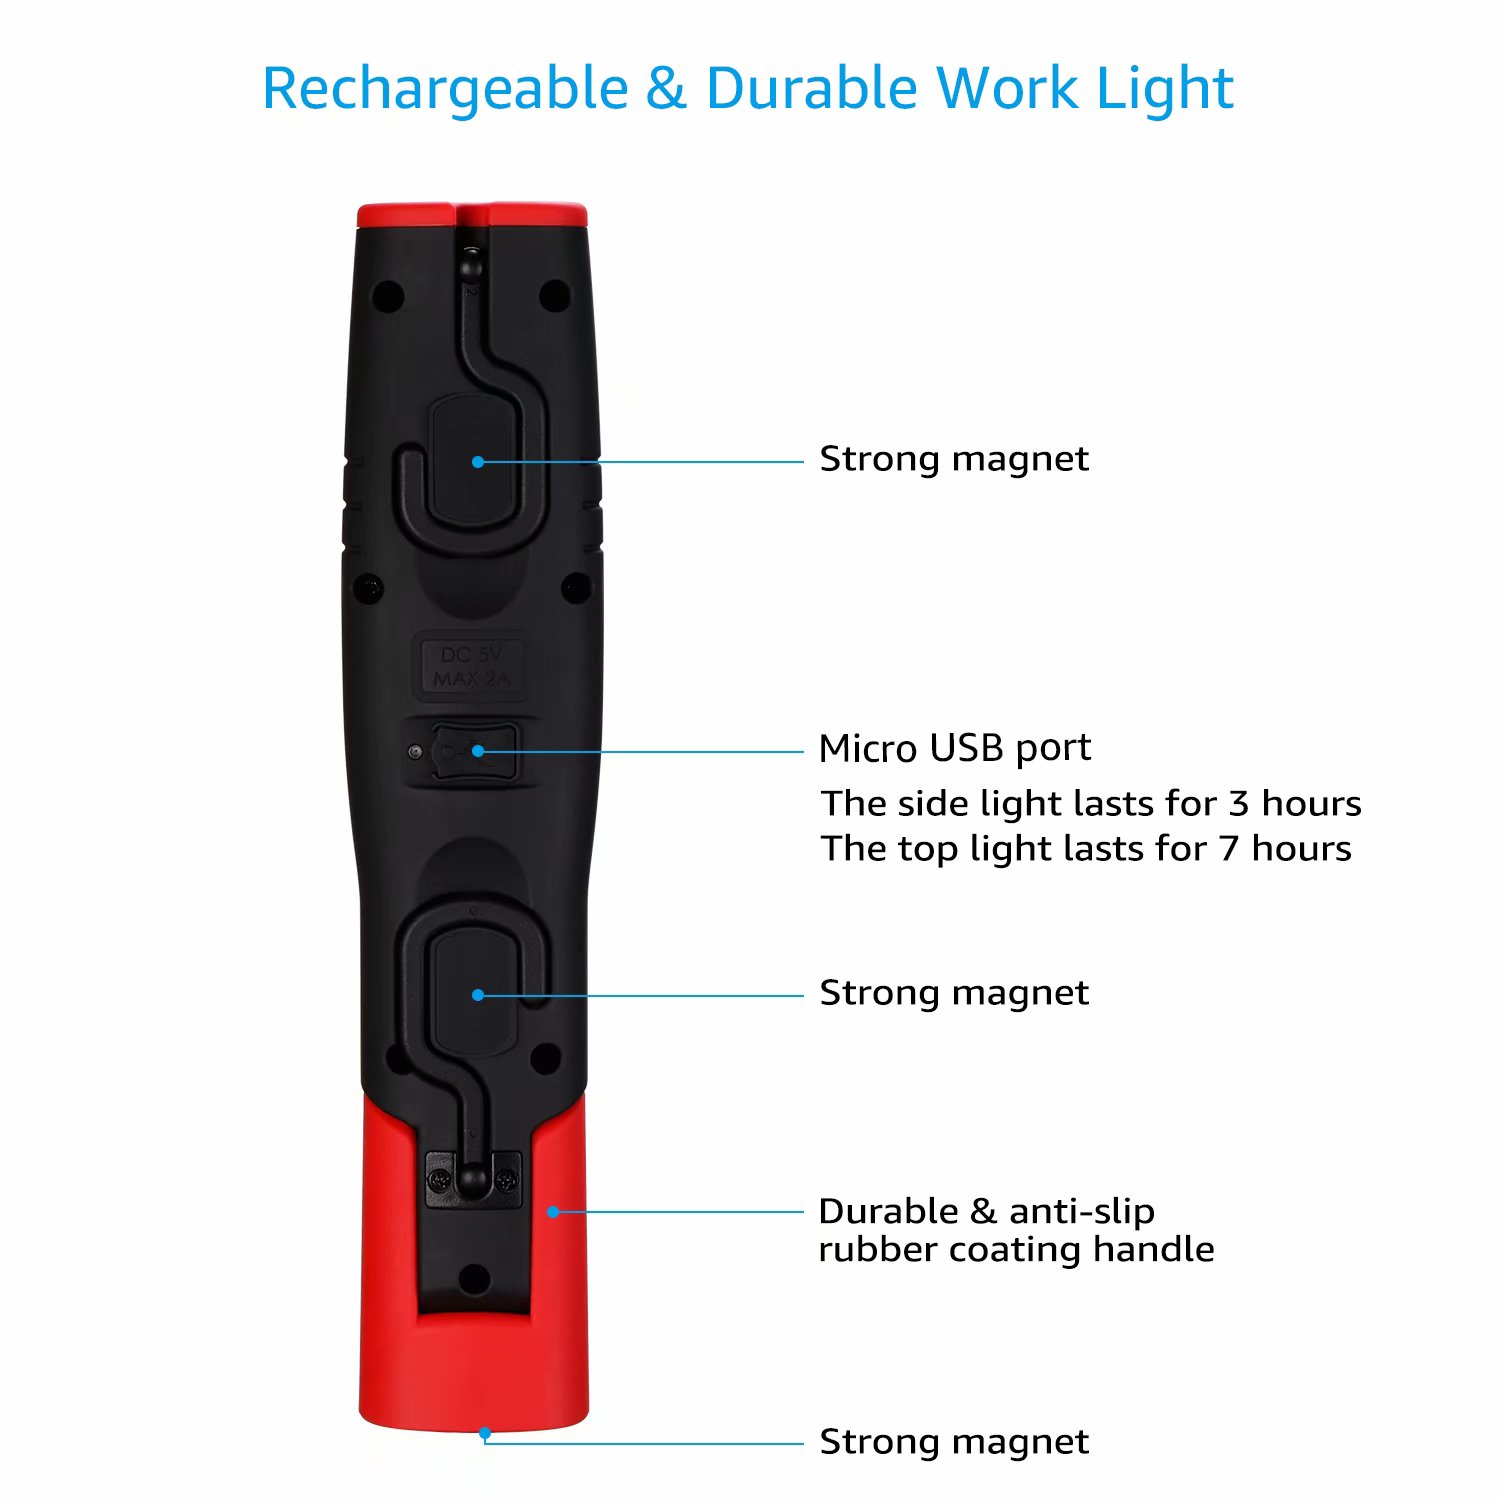 TORCHSTAR Rechargeable LED Work Light, UL-listed Power Supply, USB Charging Port, Dual Magnetic Bases & 360° Rotate Hanging Hooks, Handheld Flashlight, for Camping, Car Repairing, Emergency Lighting - image 4 of 9